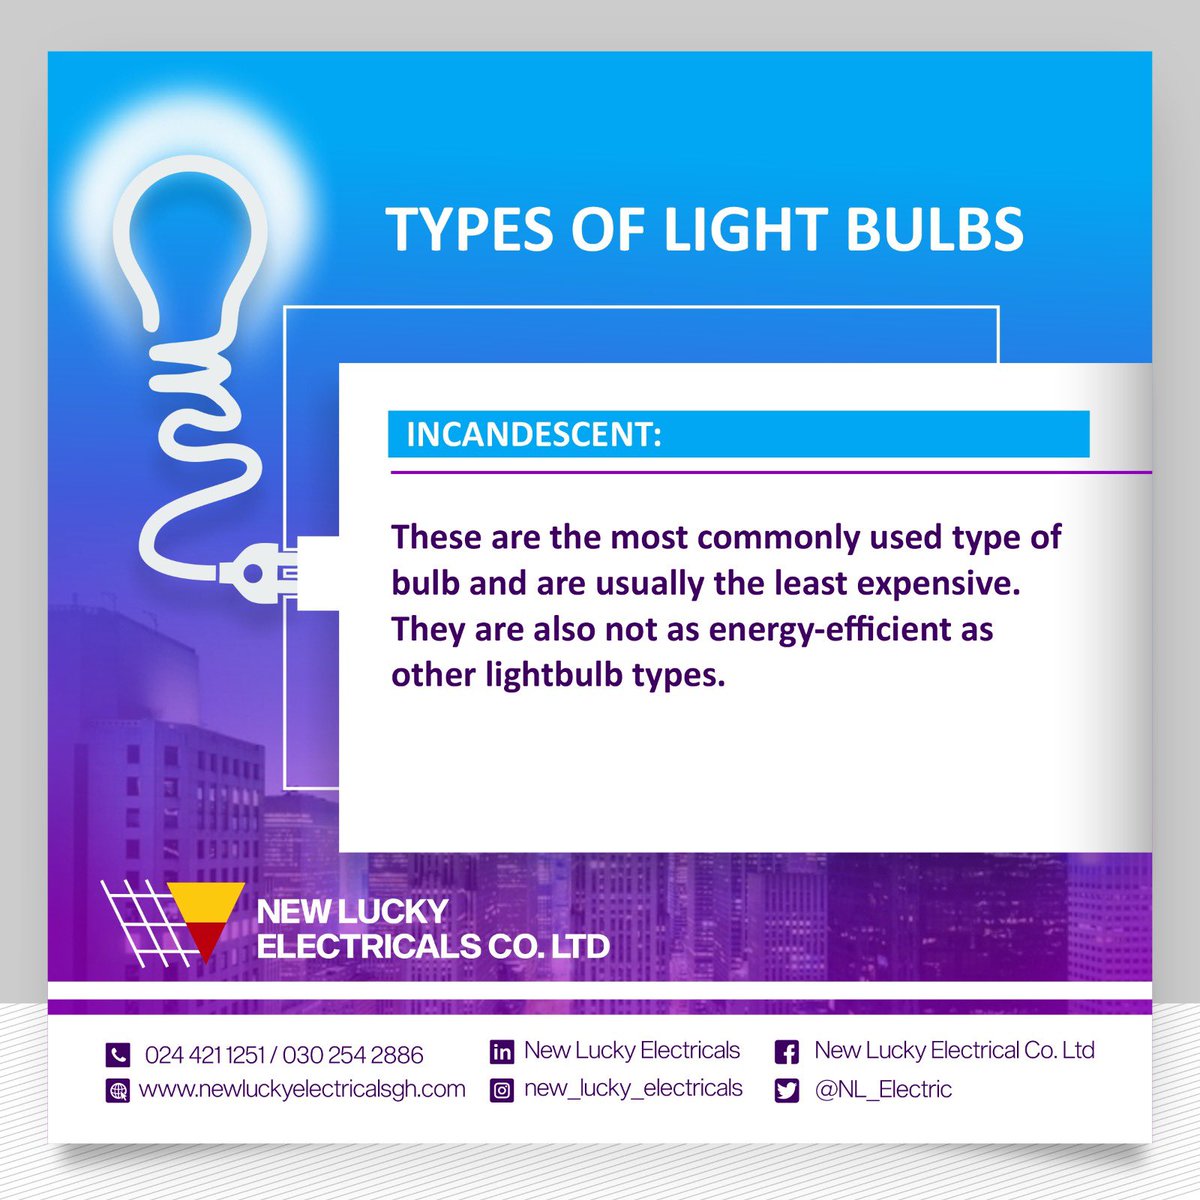 Did you know the first successful incandescent lamp was invented by Sir Joseph Swan in England in 1878?

However, his design was not commercially viable until Thomas Edison developed a more practical and efficient incandescent light bulb.
#lightingsolution